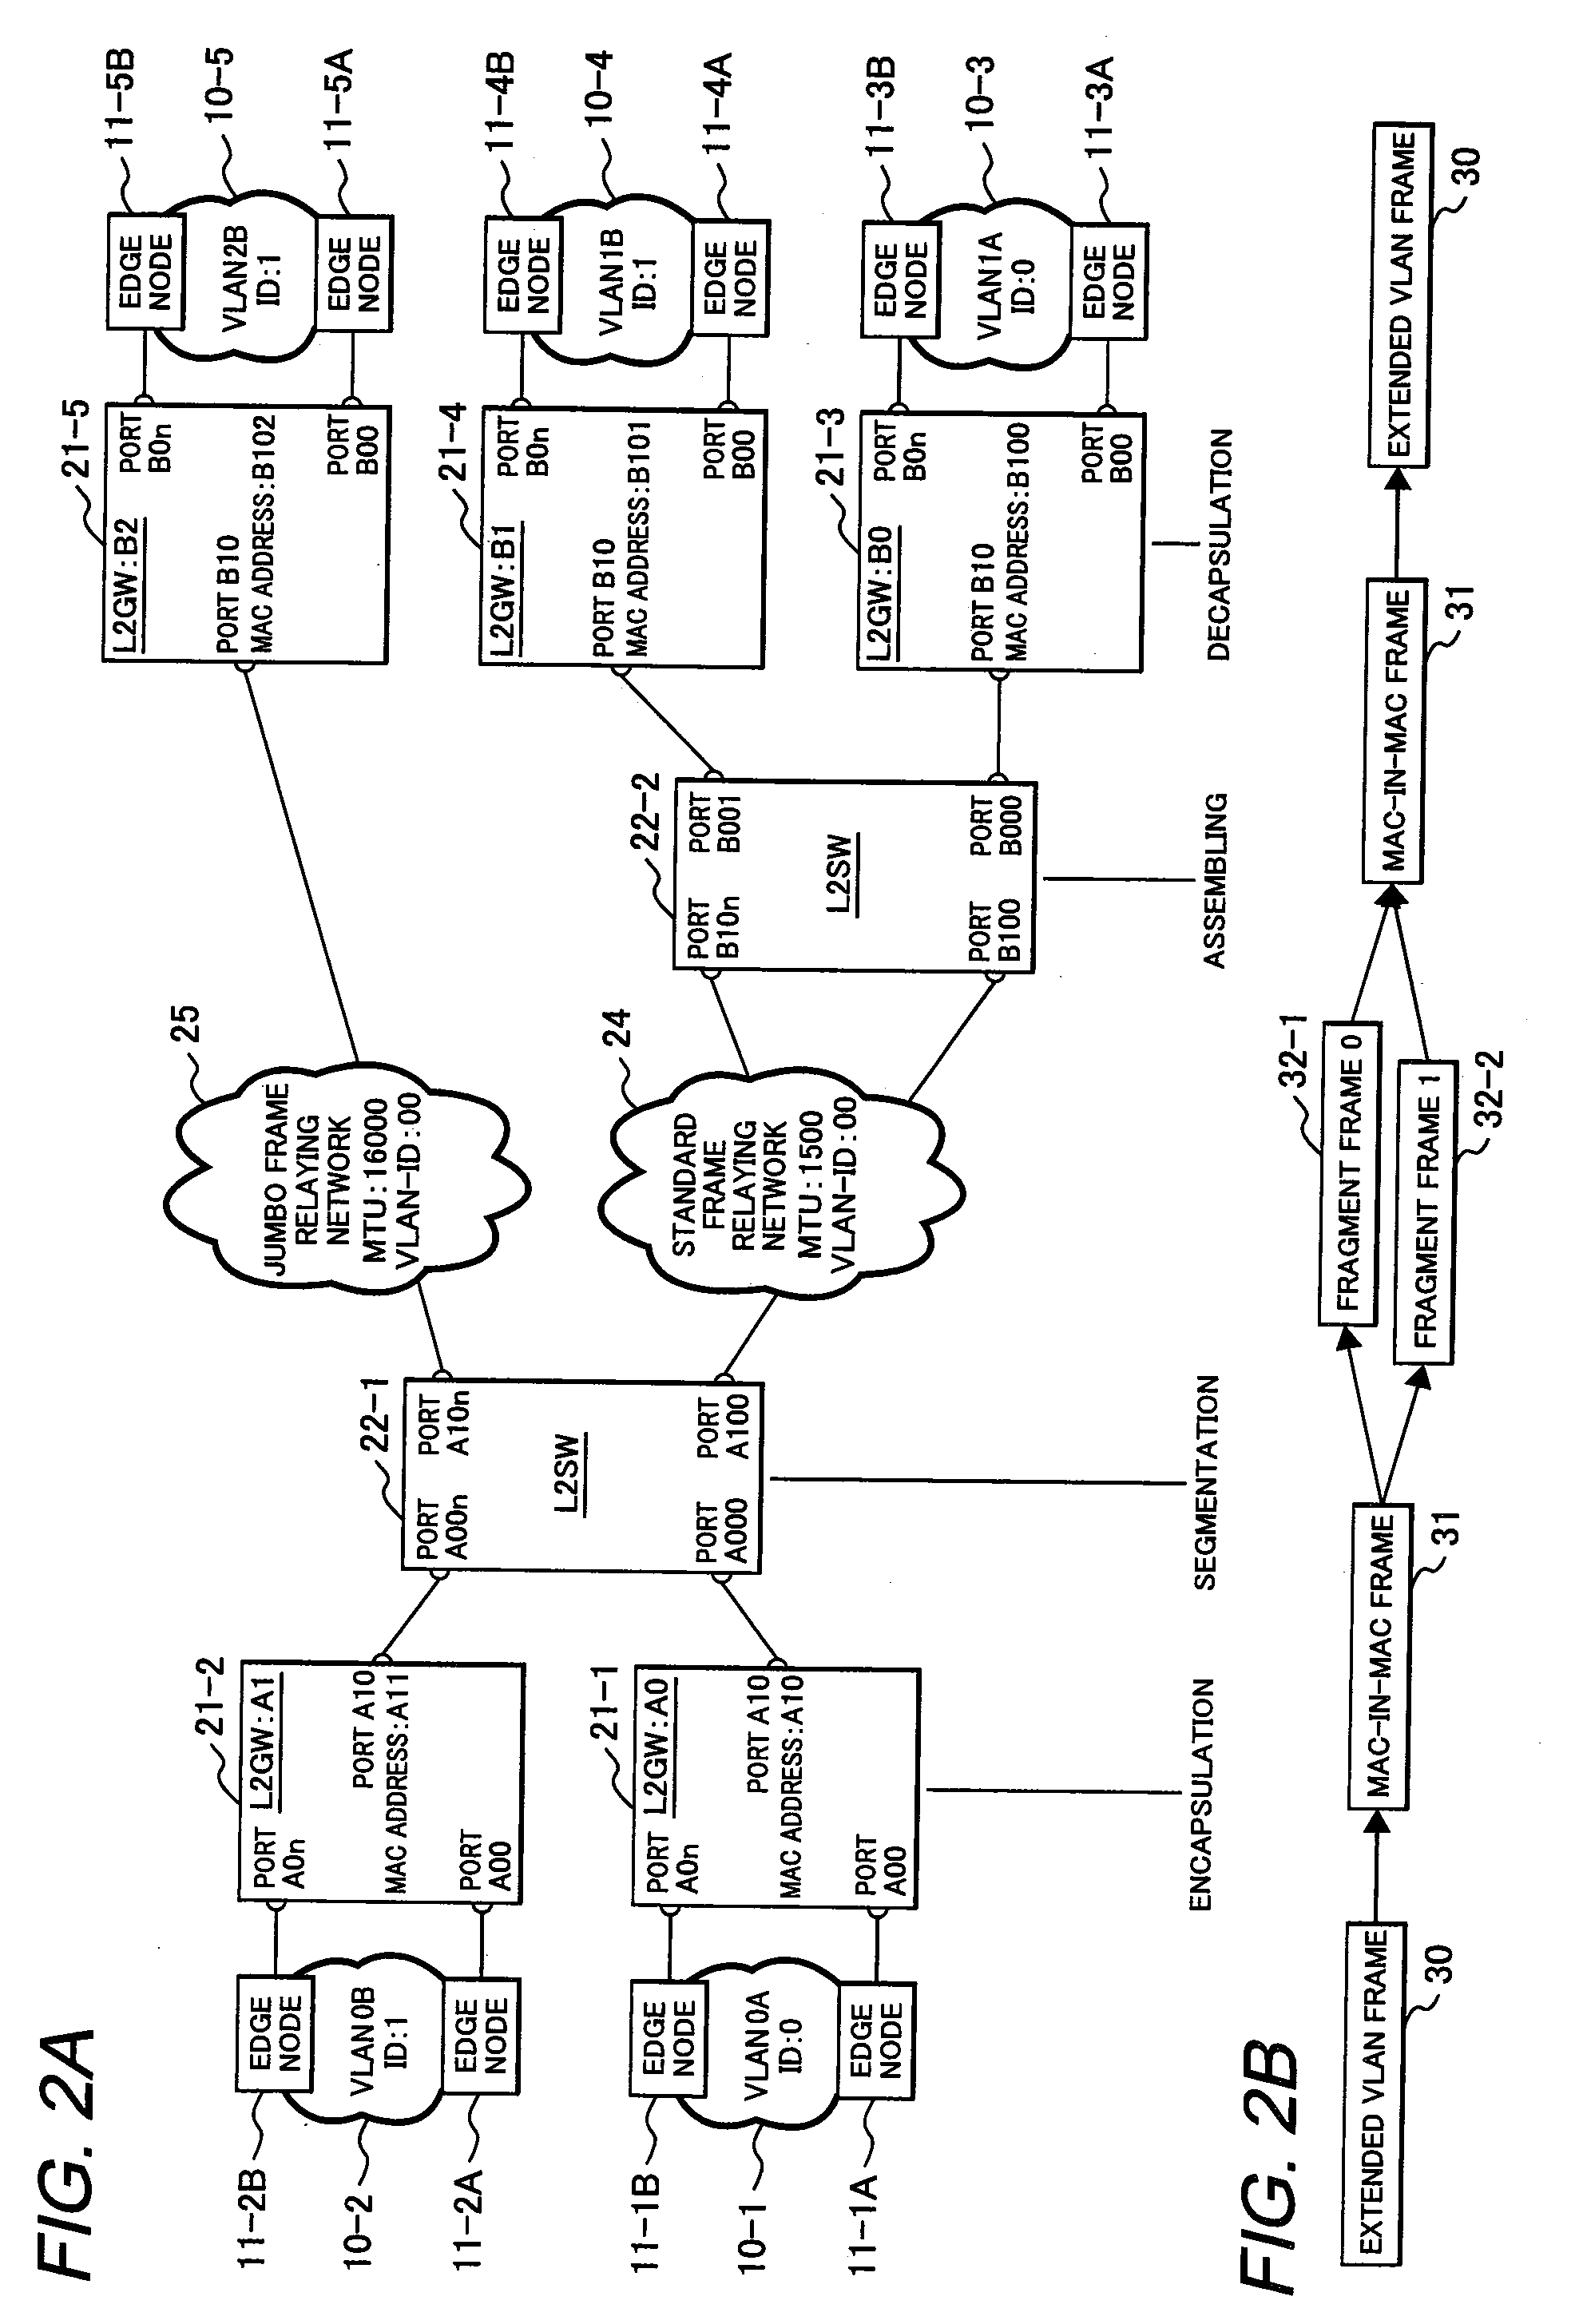 Packet forwarding apparatus suitable for forwarding extended frame